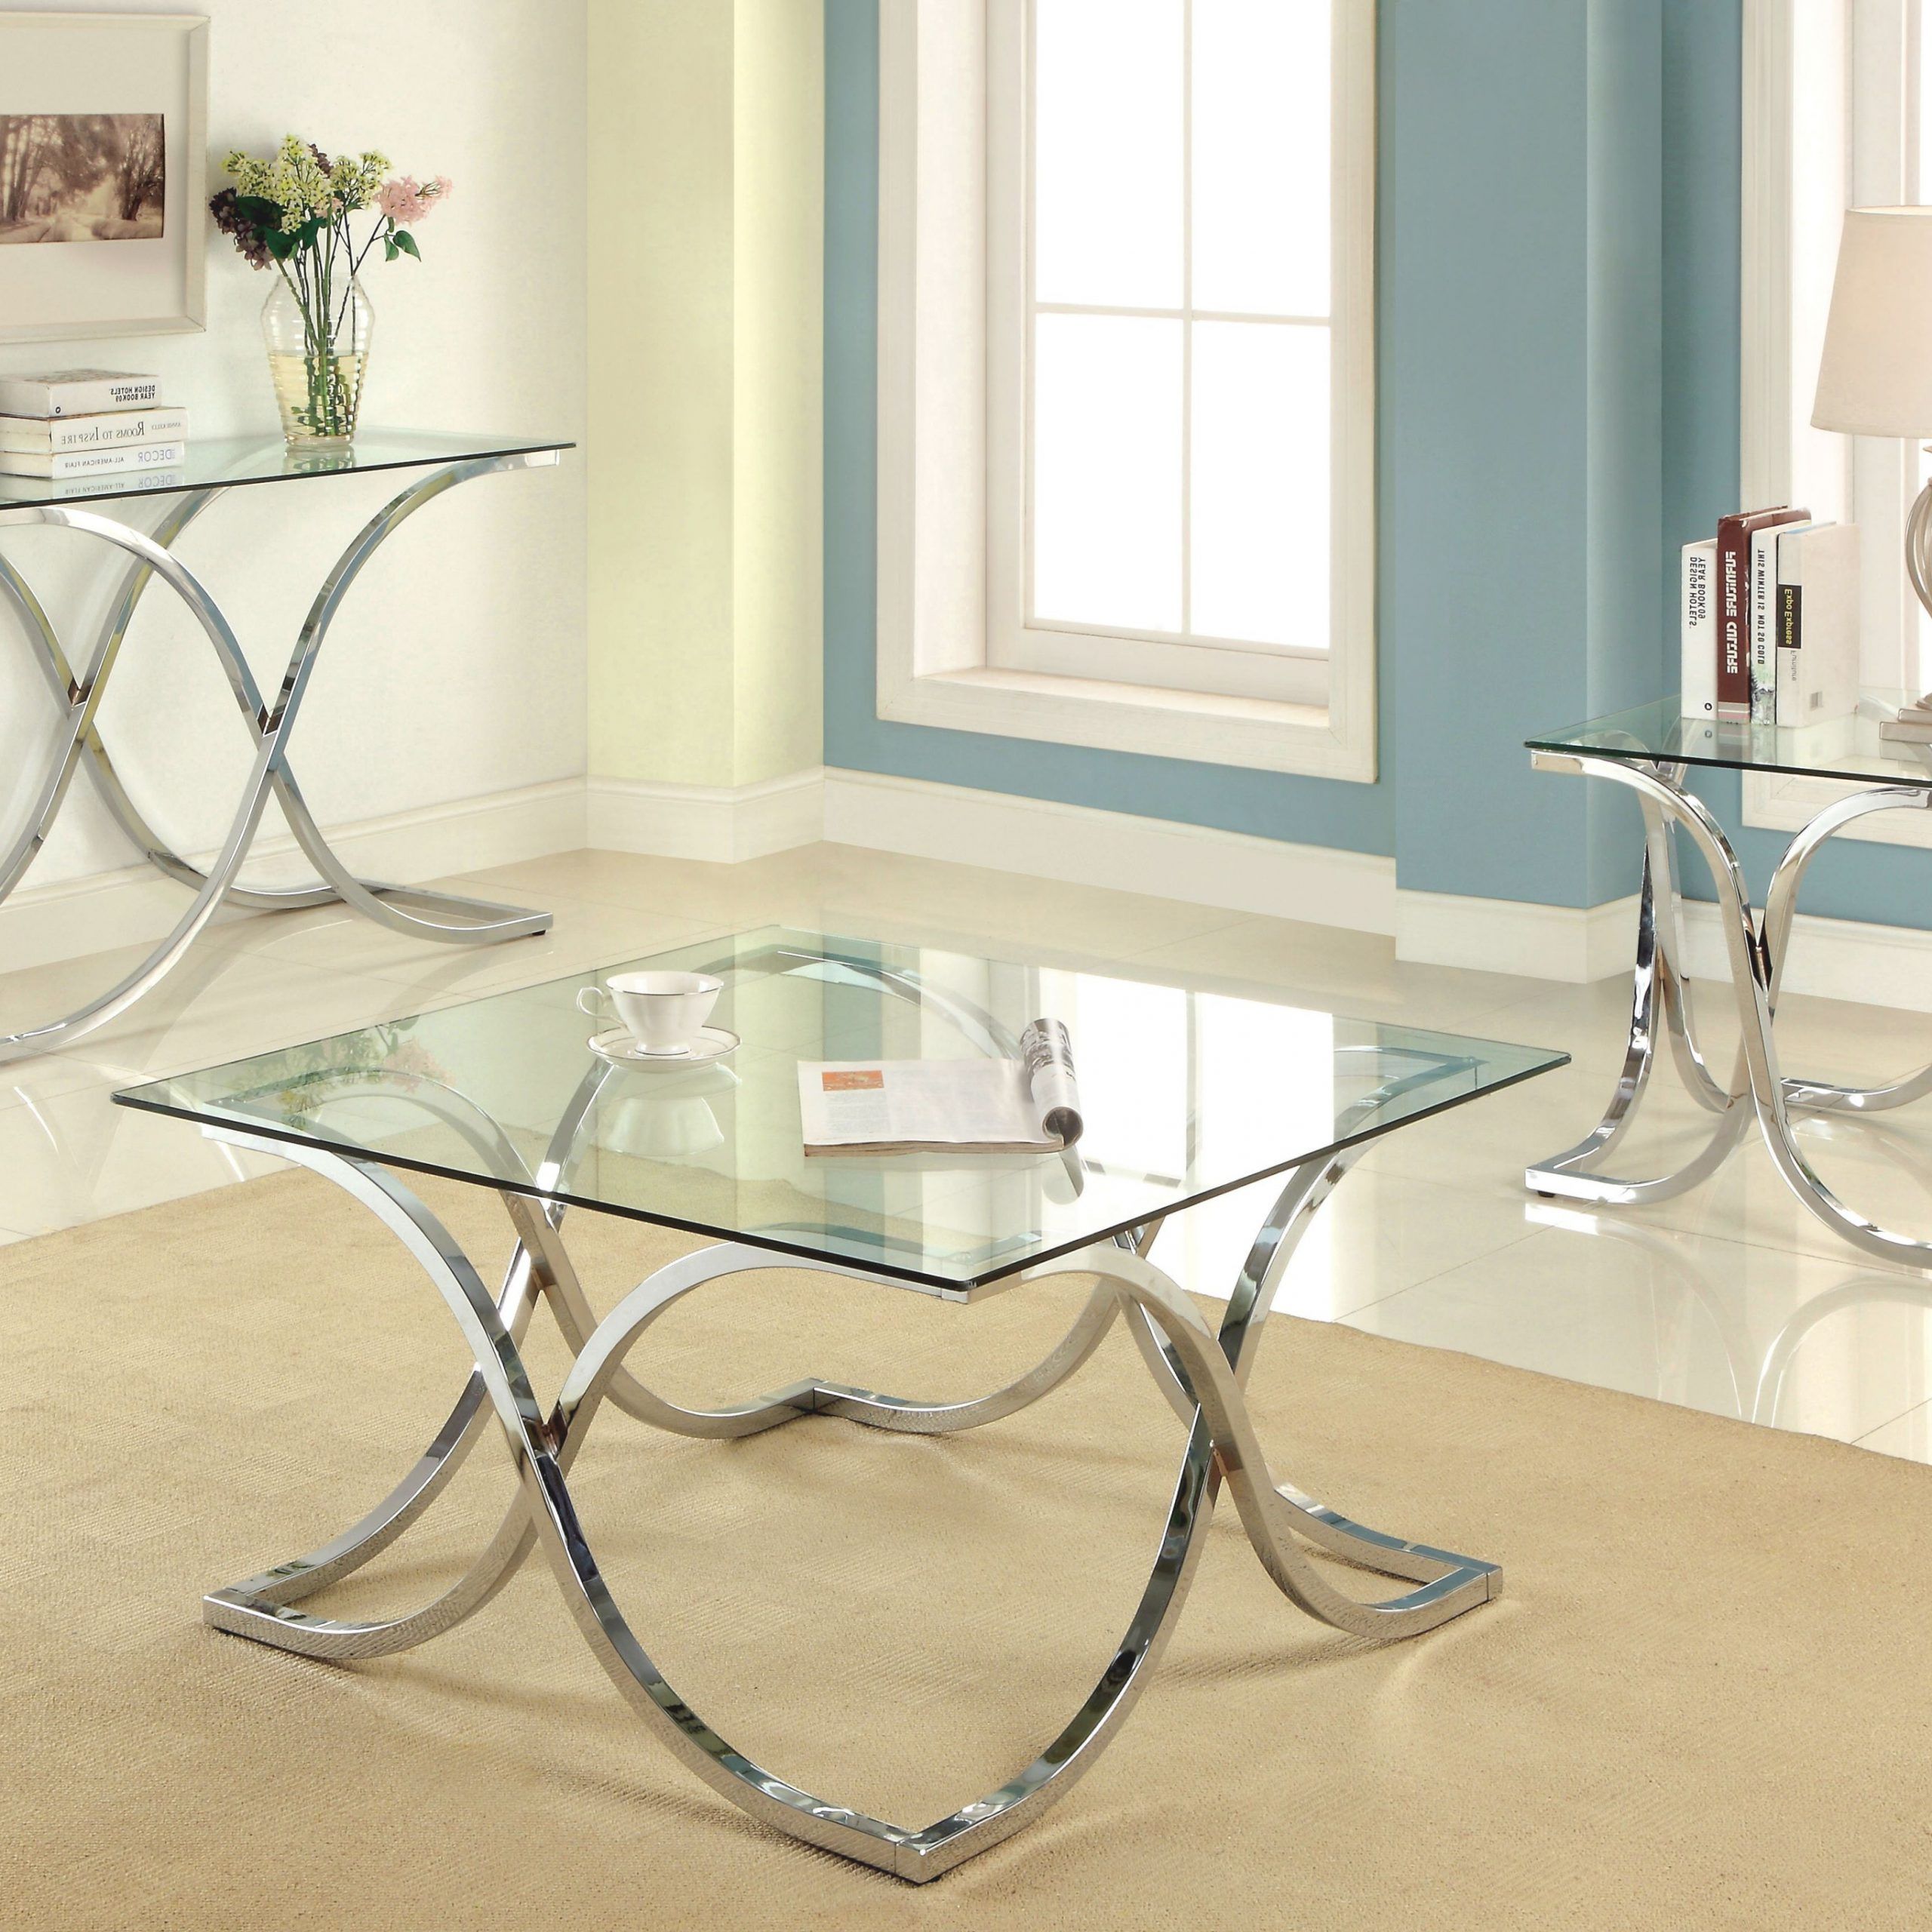 Most Recent 3 Piece Coffee Tables In Elegant 3 Piece Glass Coffee Table Set – Awesome Decors (View 3 of 20)